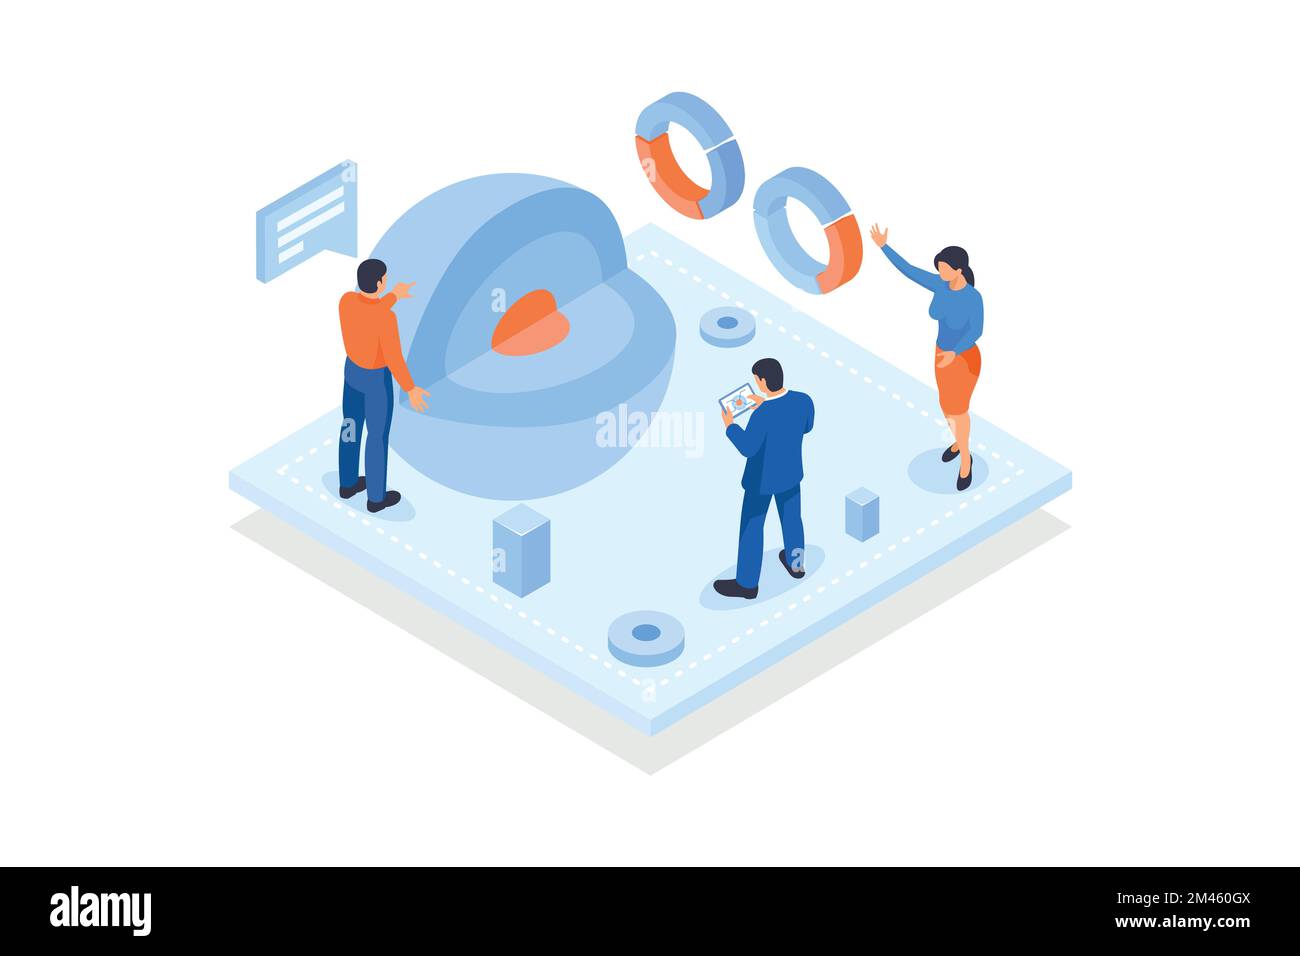 Conceptual template with sphere with cut out piece surrounded by analysts. Scene for future of material analysis or research, nanotechnology, isometri Stock Vector